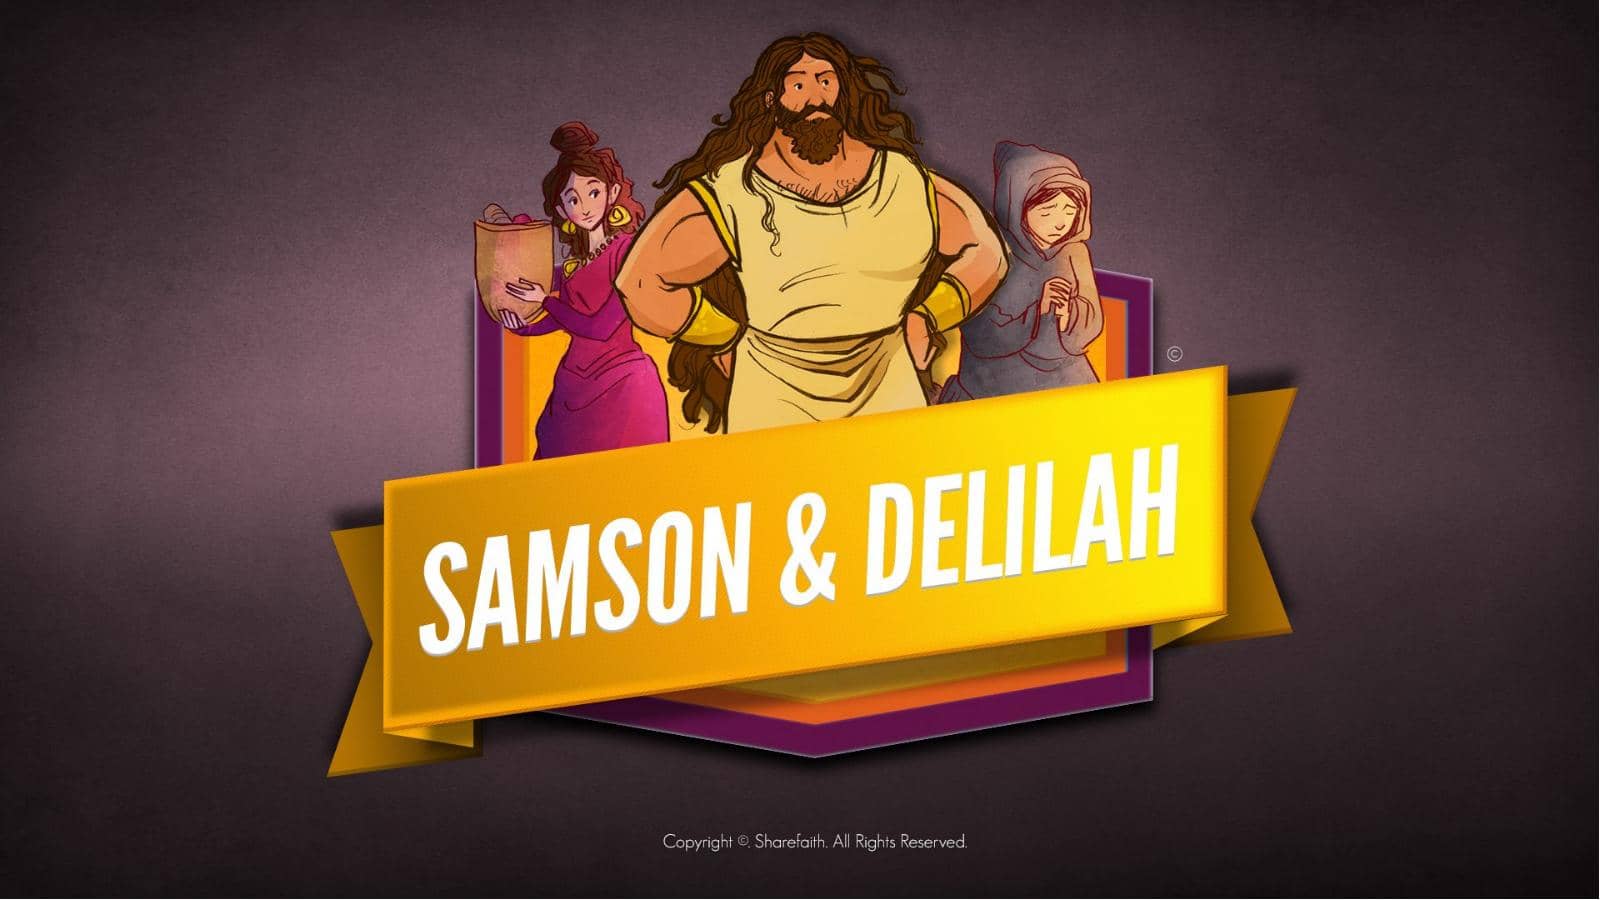 samson from the bible